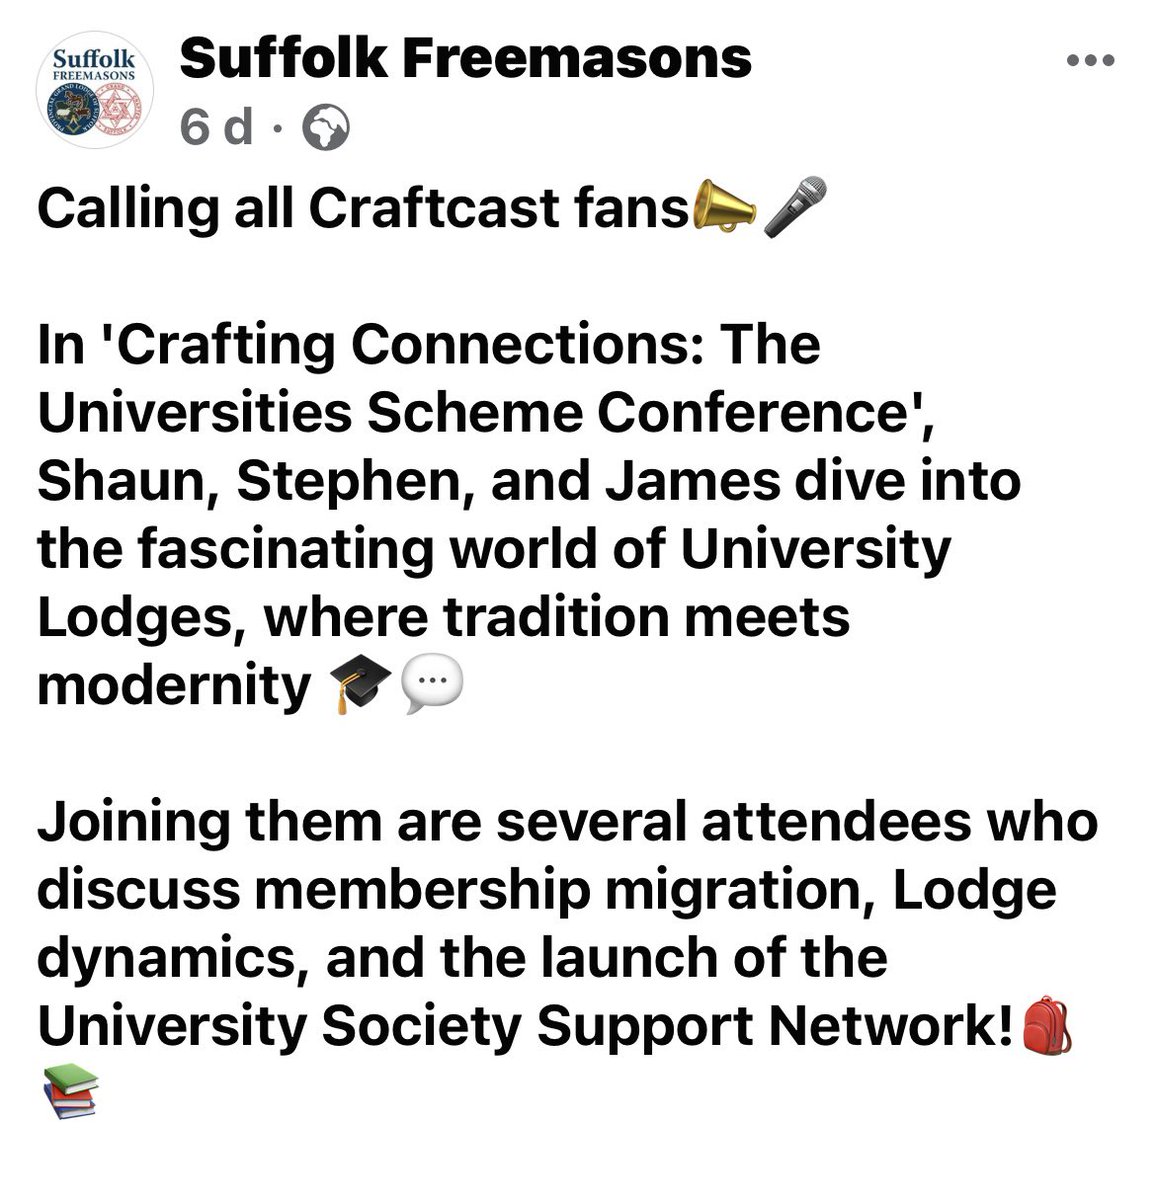 Calling all Craftcast fans
#suffolk #freemasons  Tune into the latest episode craftcast.captivate.fm/listen